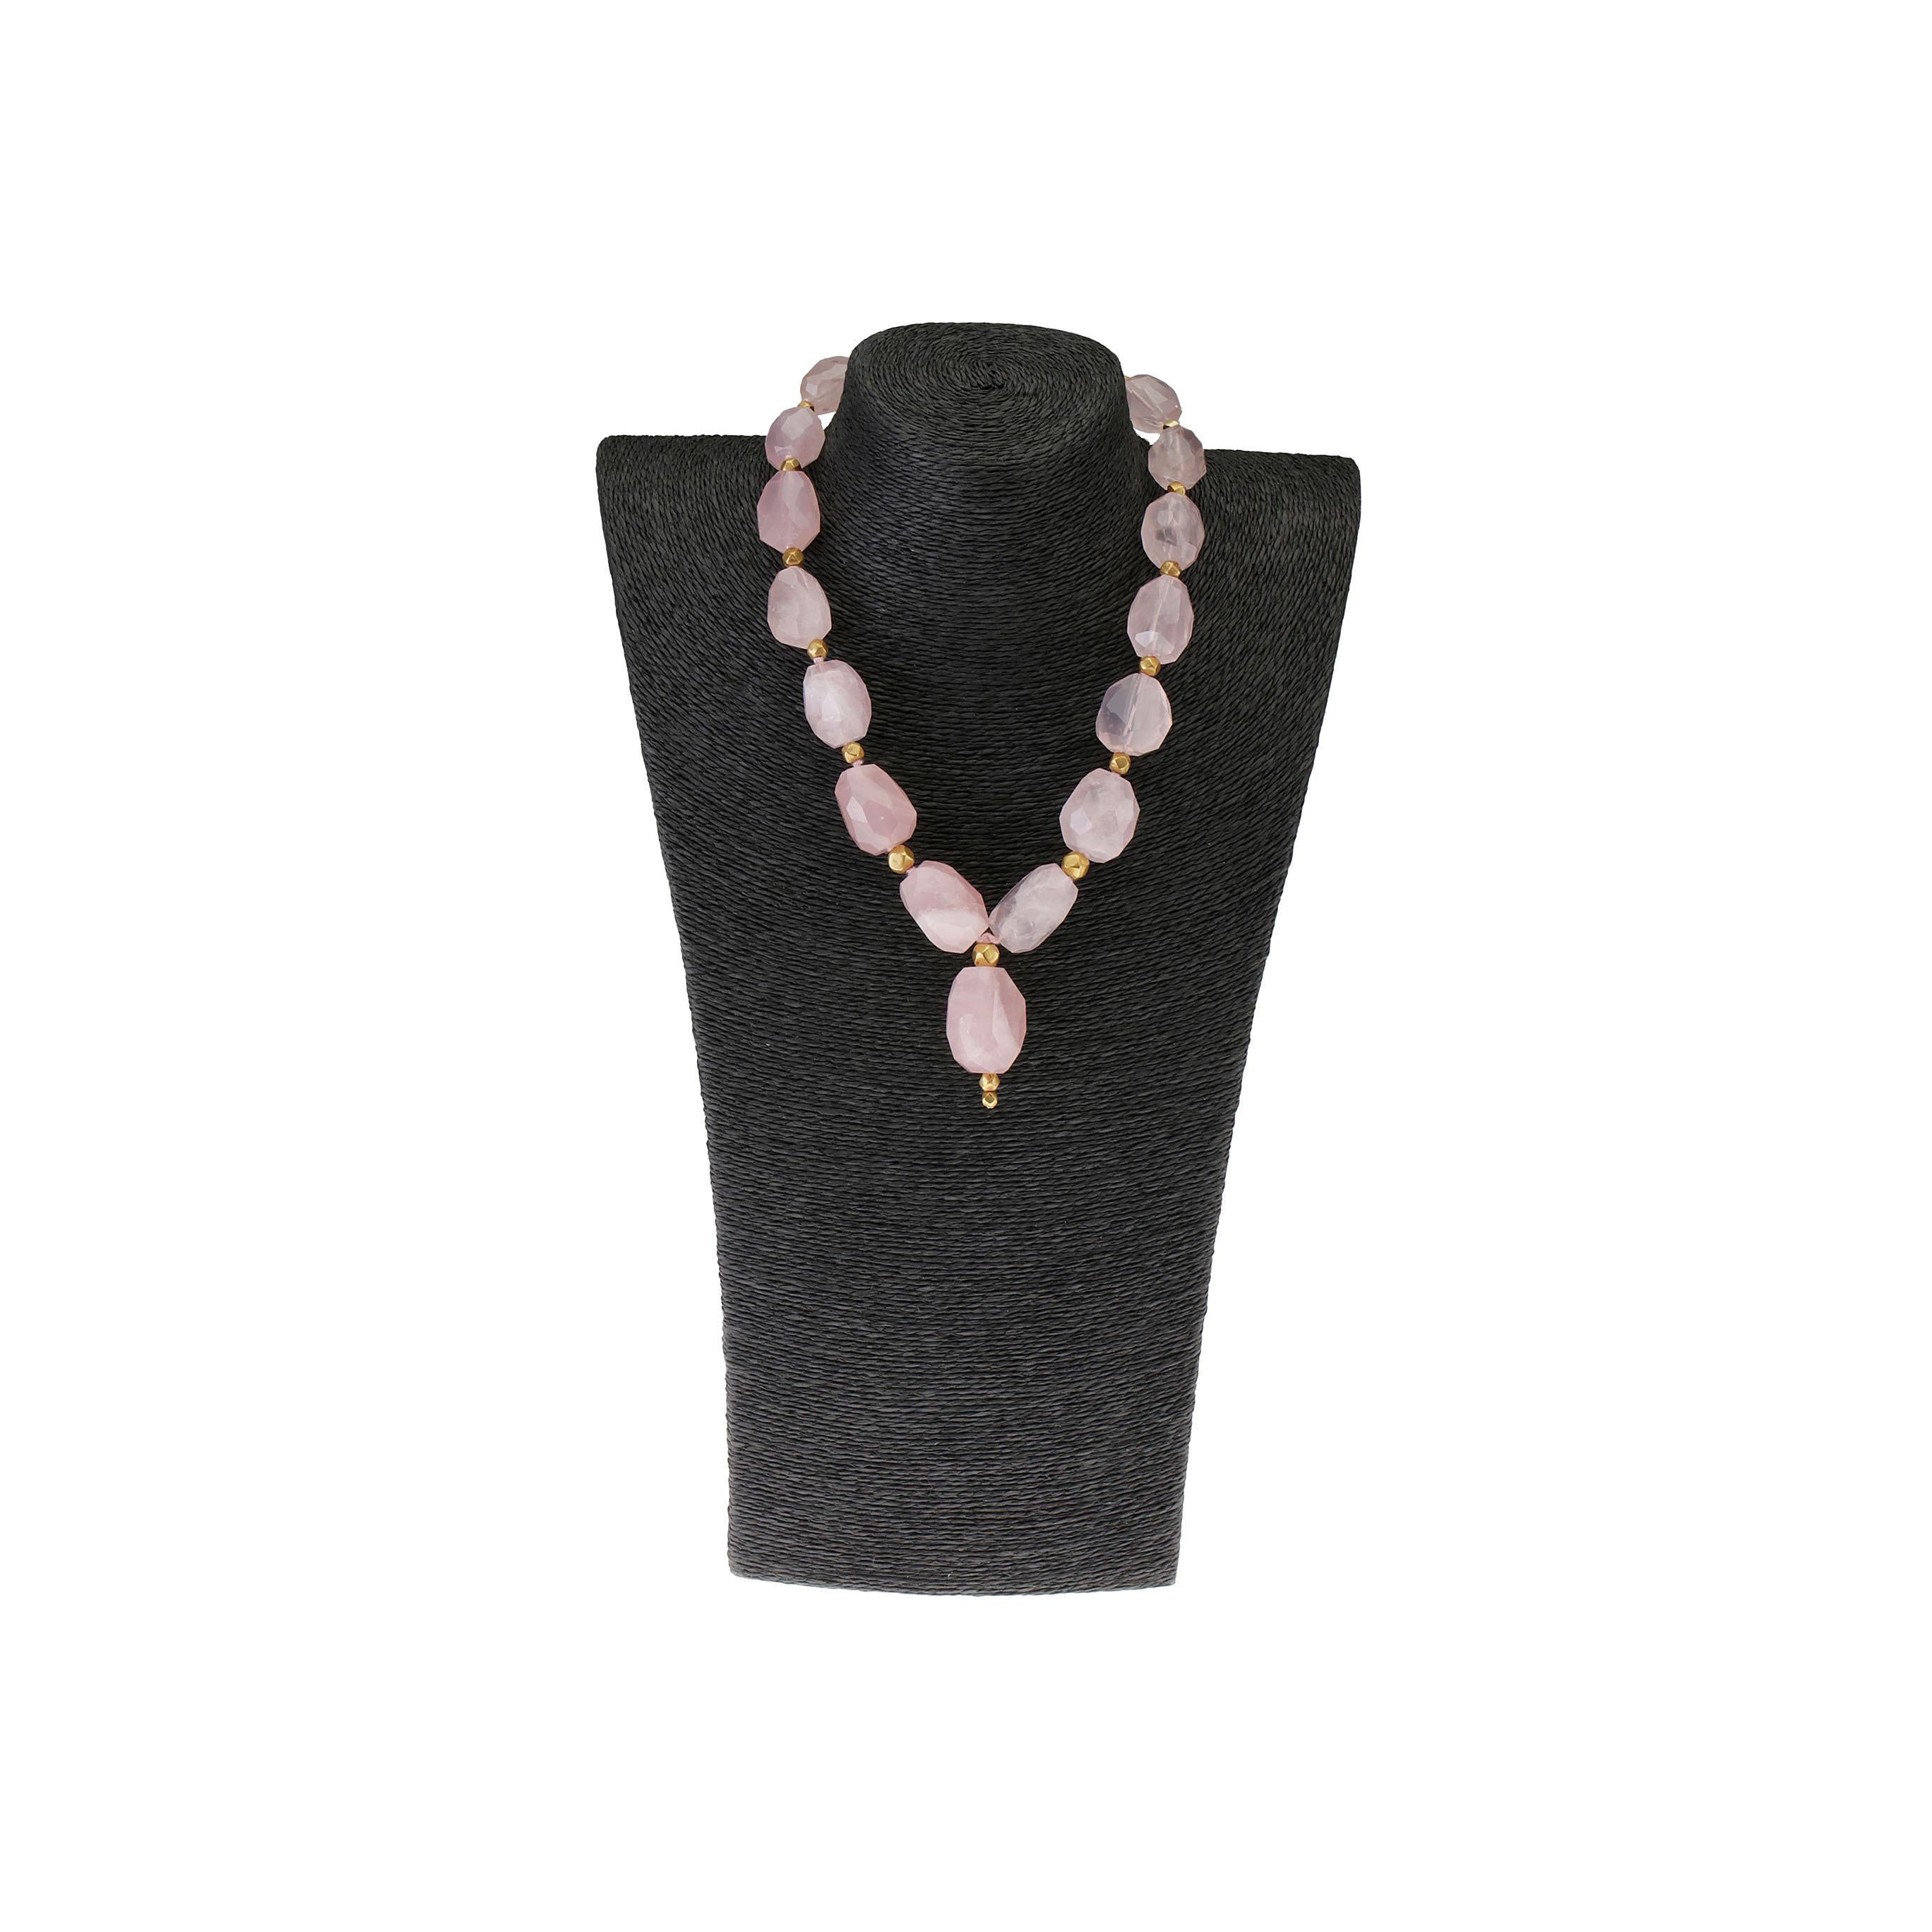 Amazing rose quartz and Indian Gold beads necklace 18k gold gr. 6,90.
All Giulia Colussi jewelry is new and has never been previously owned or worn. Each item will arrive at your door beautifully gift wrapped in our boxes, put inside an elegant